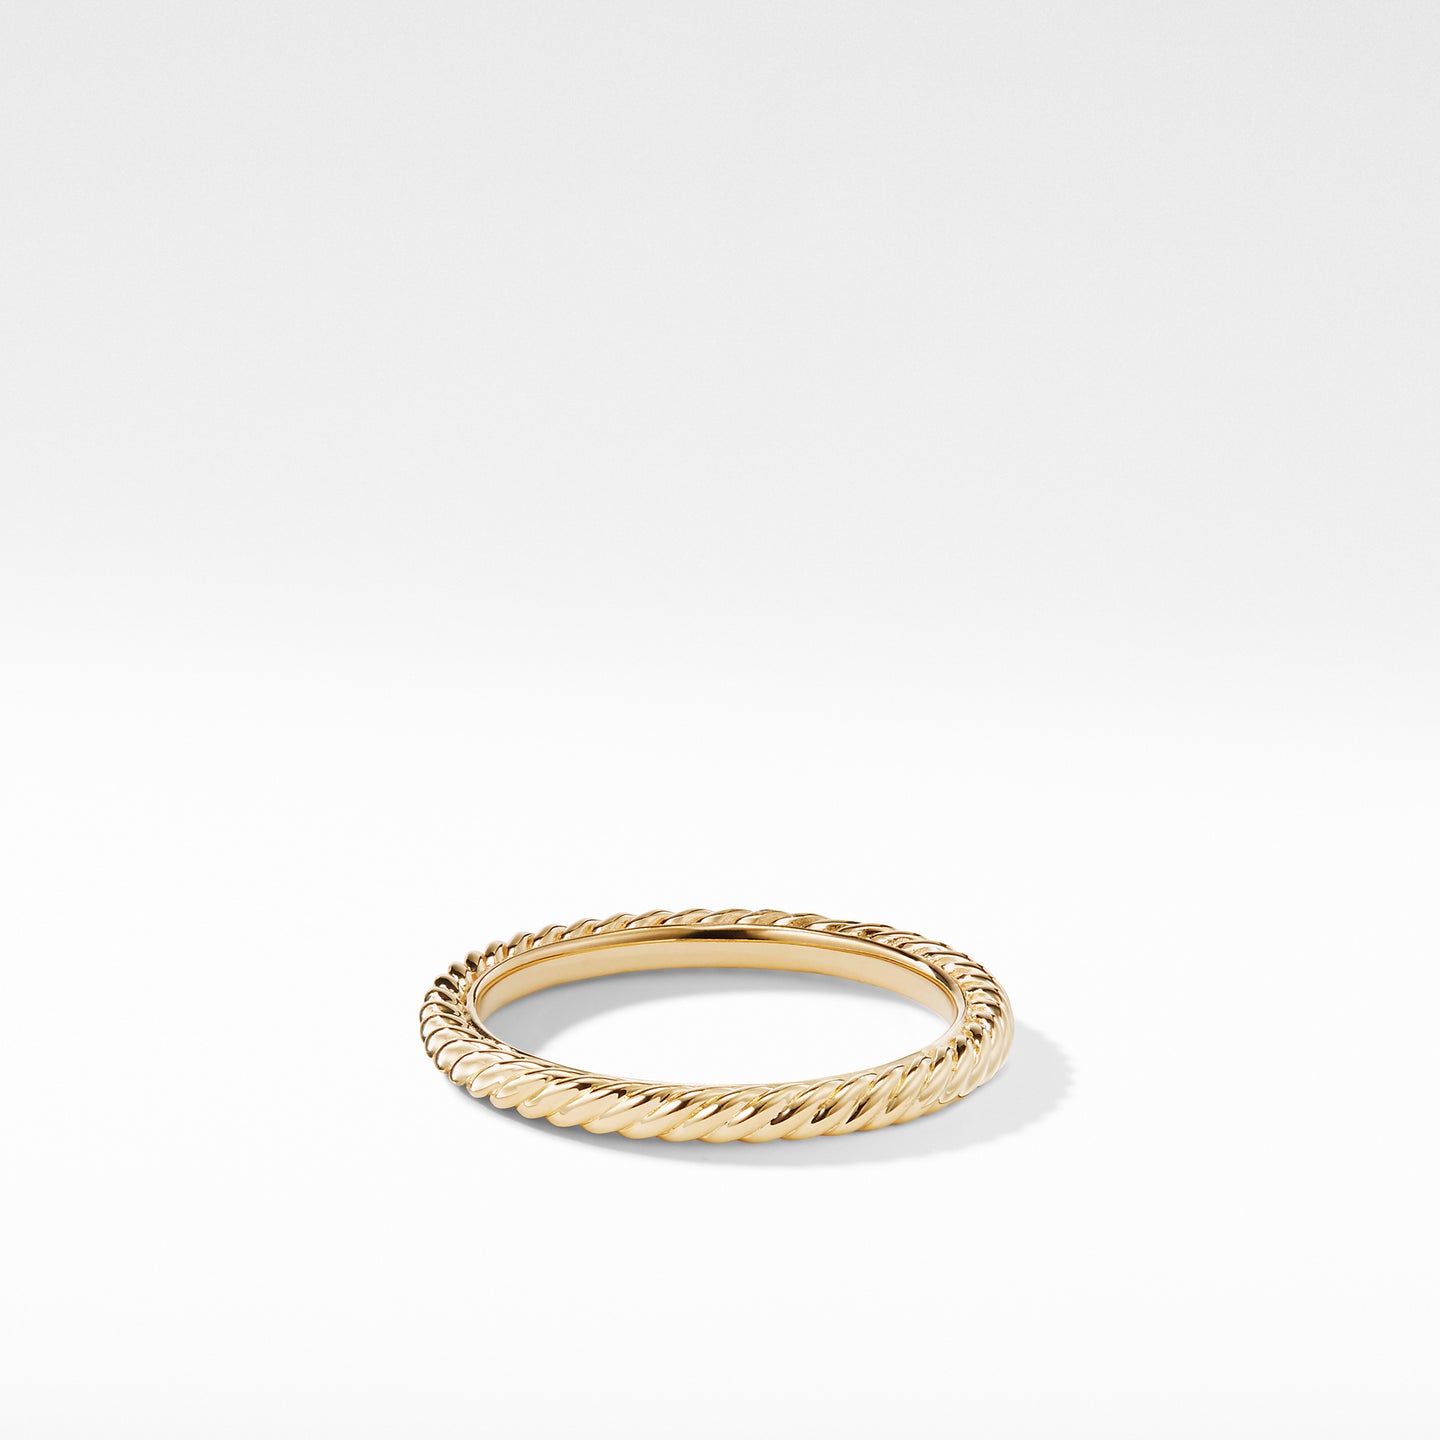 Ring in 18K Gold, Size 6